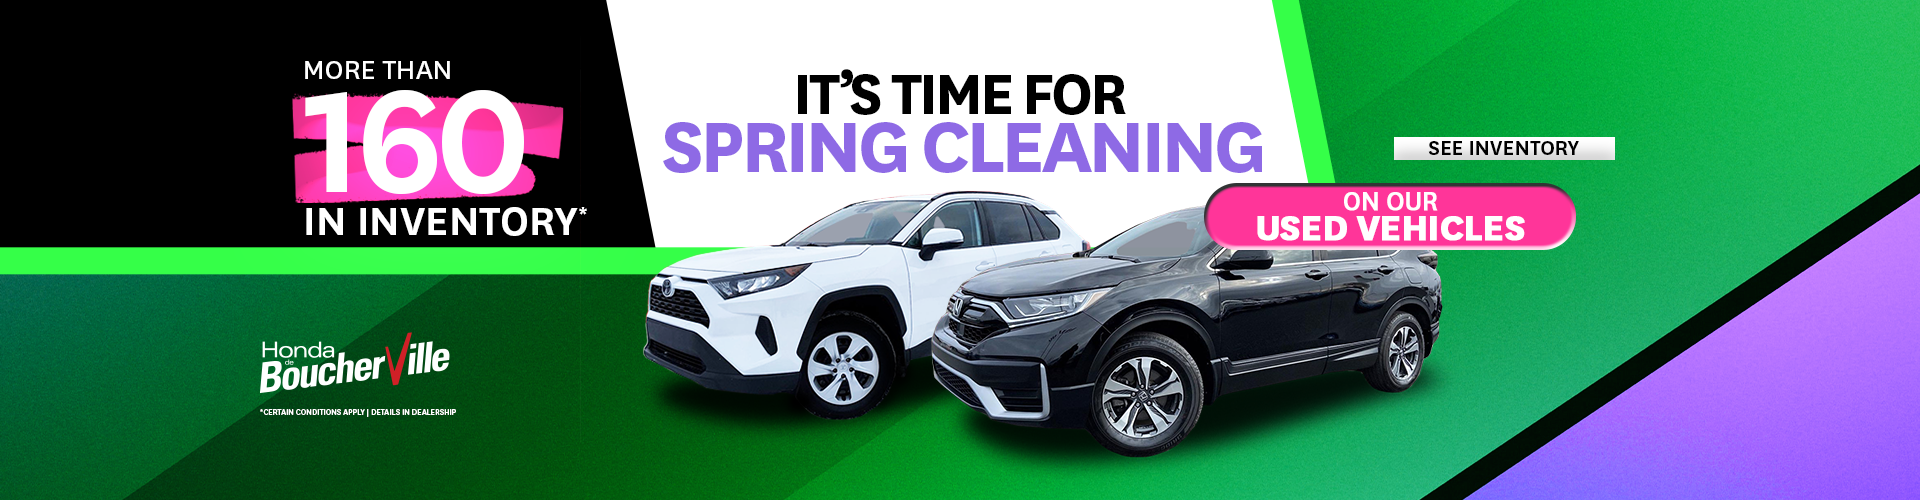 IT'S TIME FOR SPRING CLEANING !